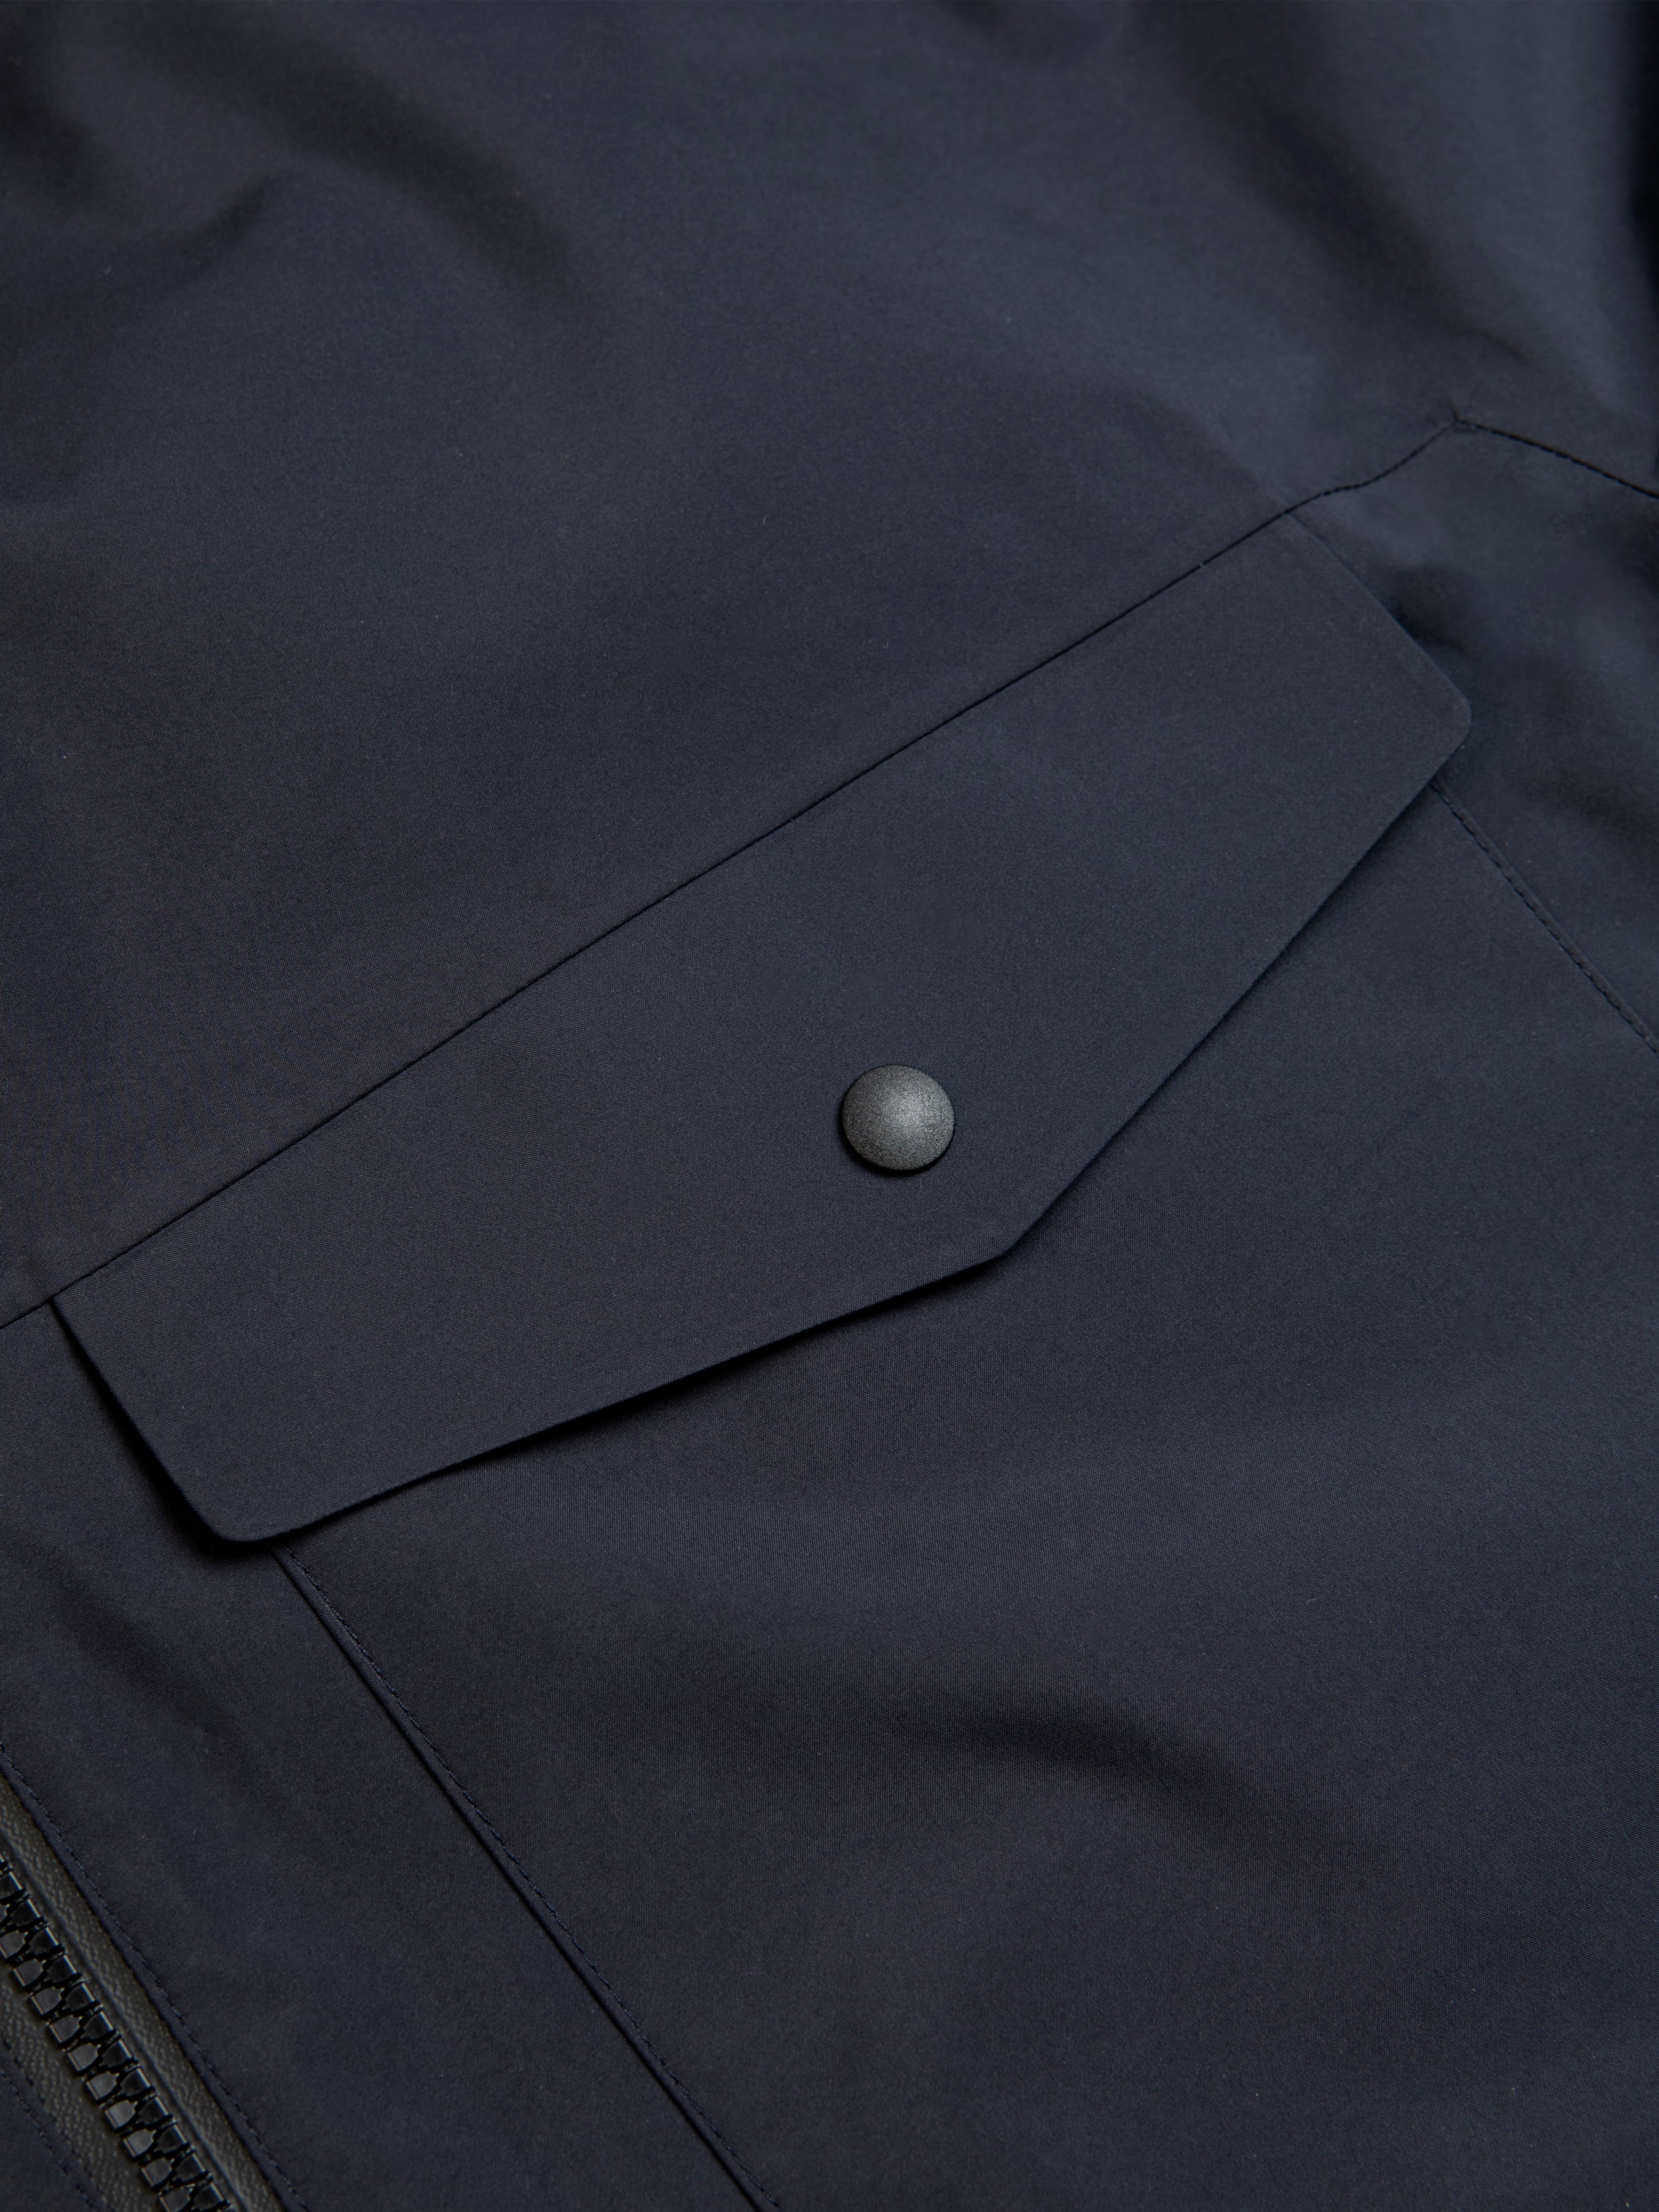 The snap-up patch pocket to the front of a navy blue waterproof shell jacket by KESTIN.